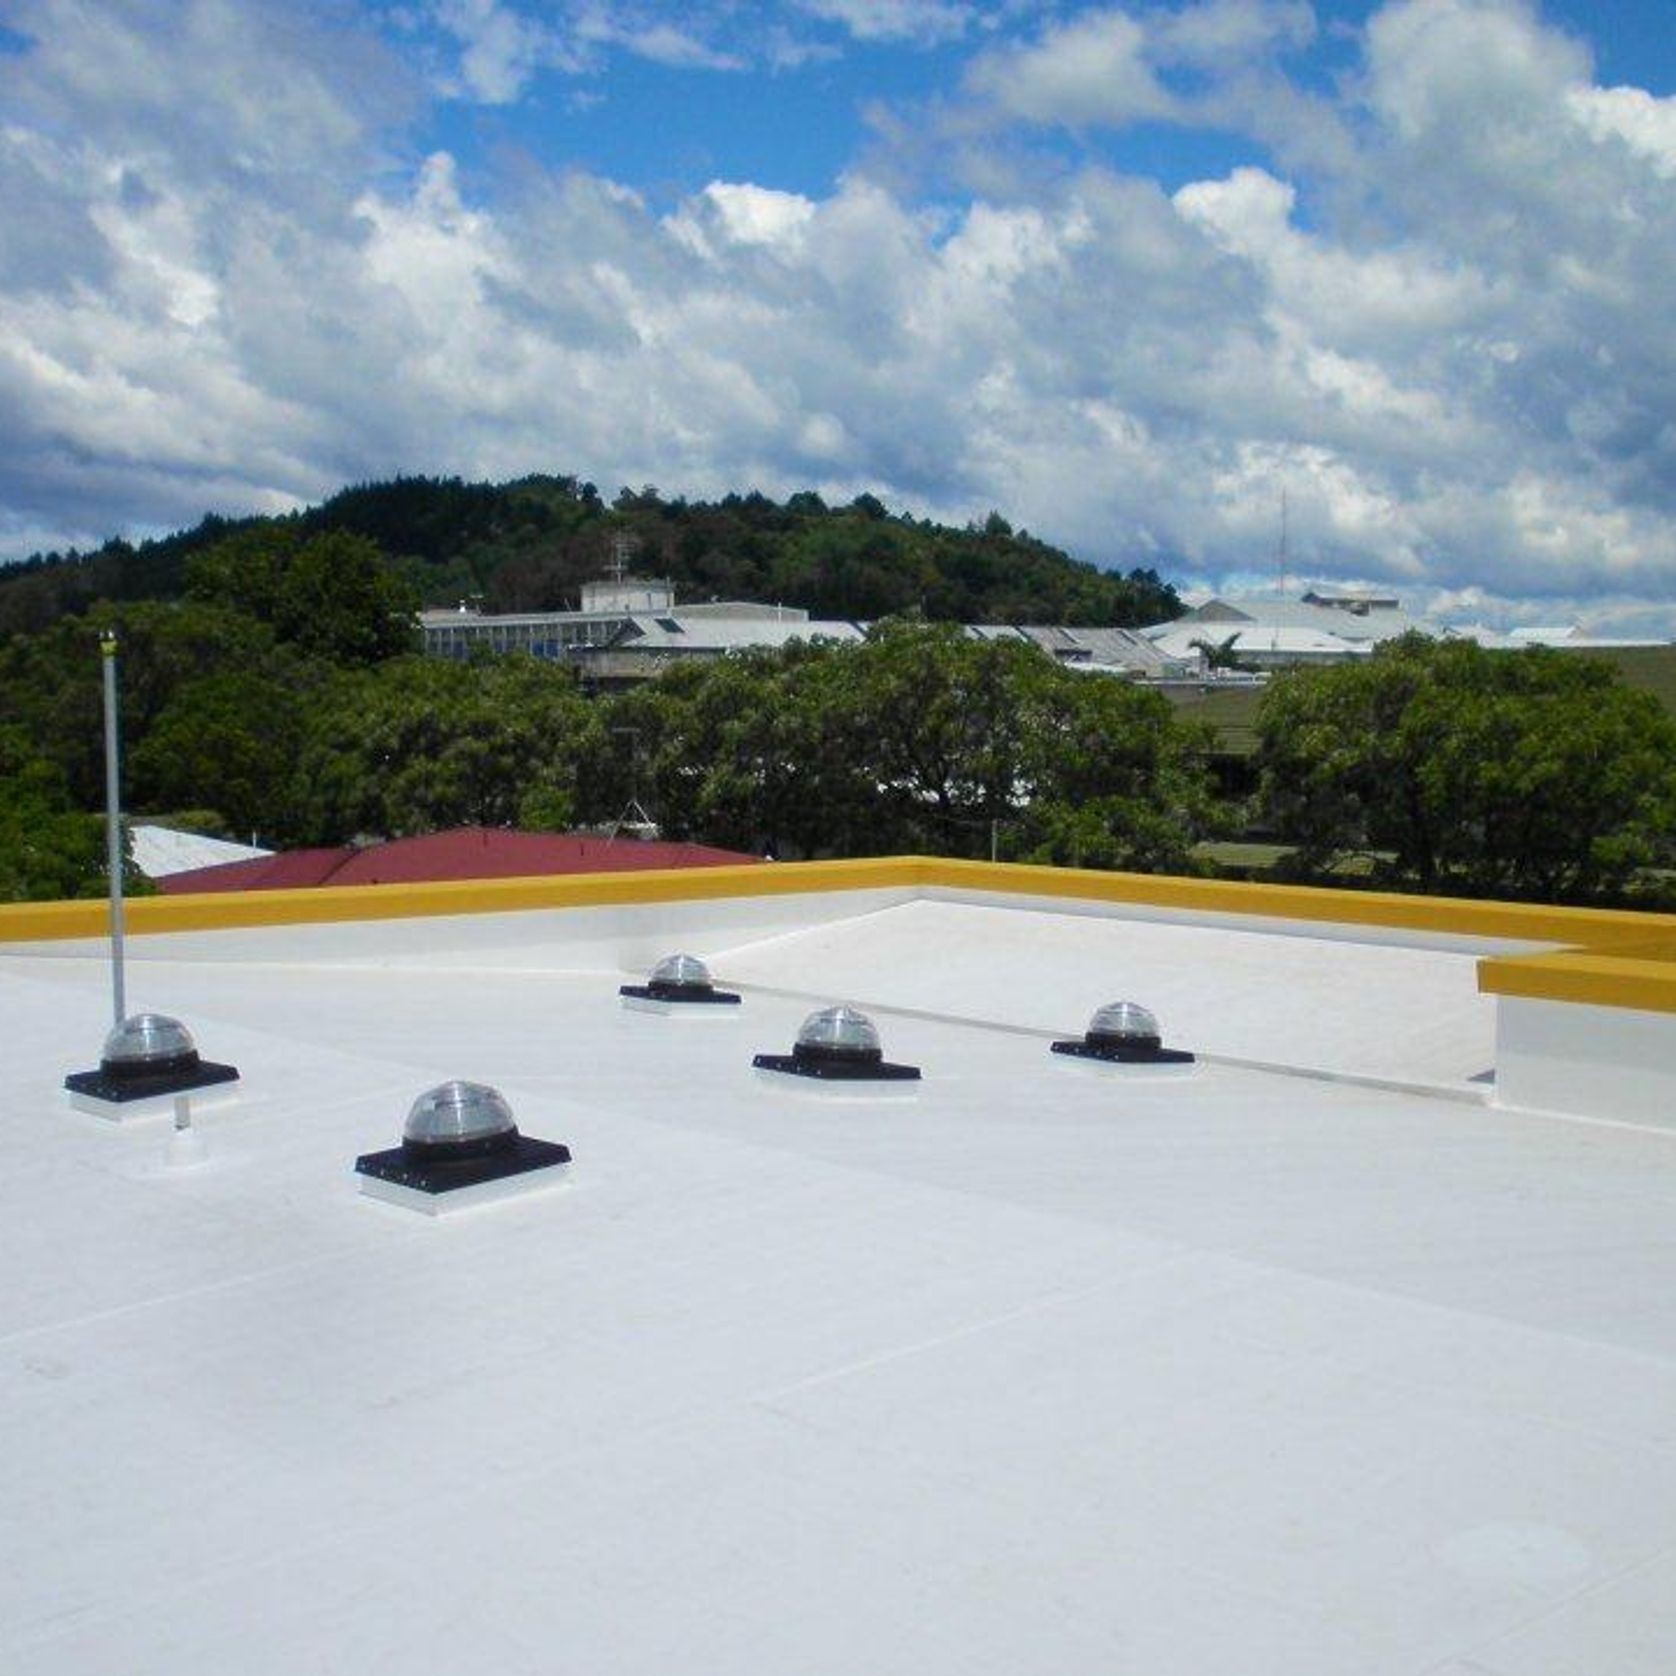 Viking WarmRoof Waterproof Roofing Insulation System gallery detail image